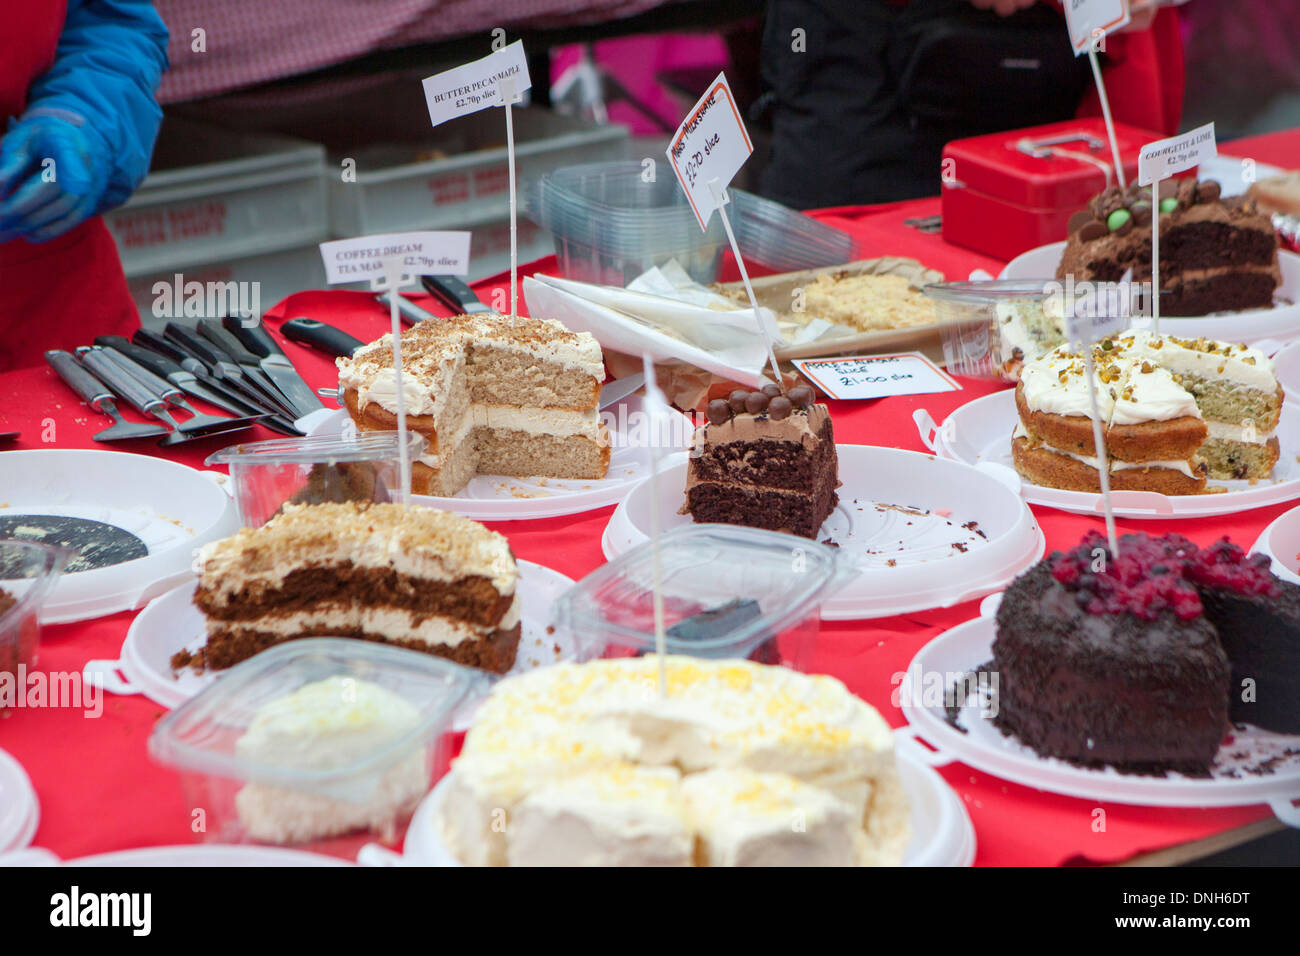 Outdoor market stall selling cream and chocolate cakes Stock Photo